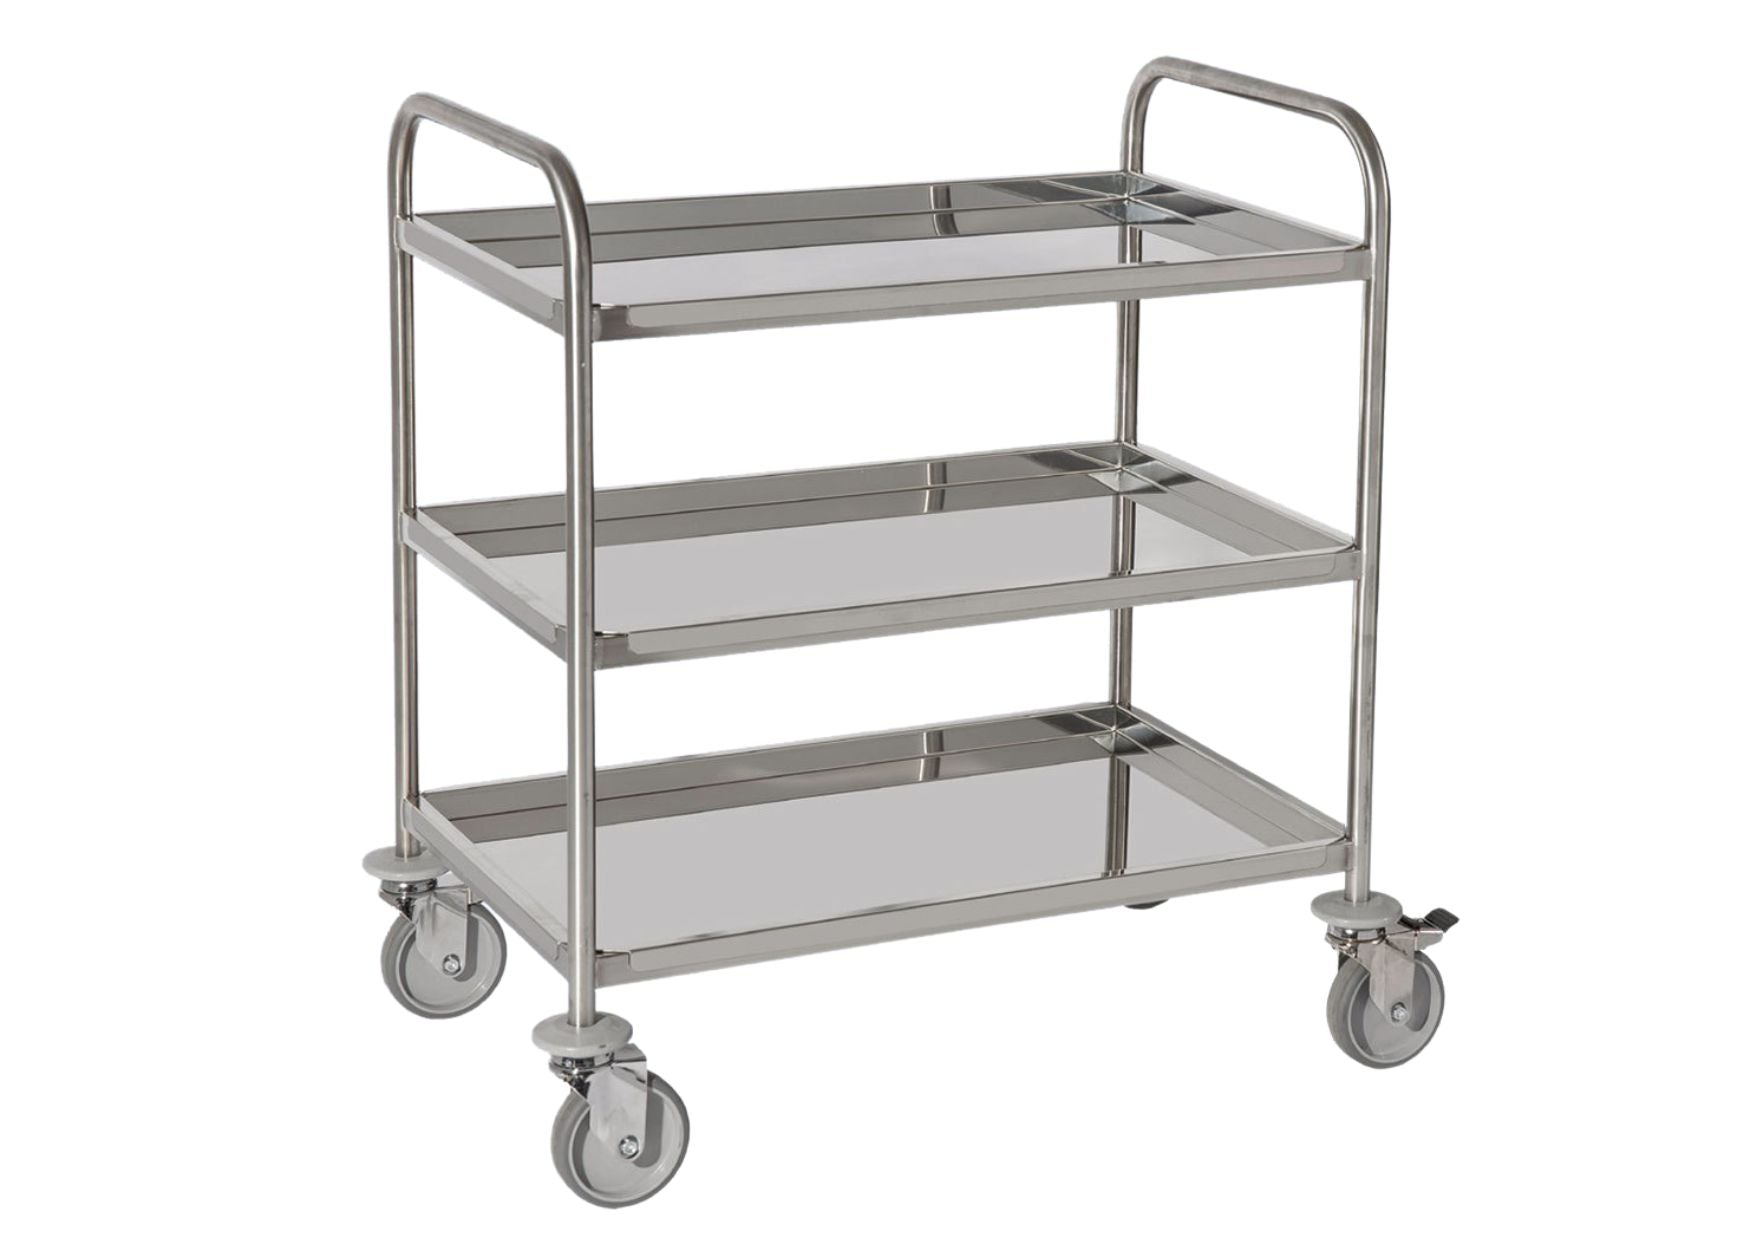 Stainless steel side trolley 3 shelves